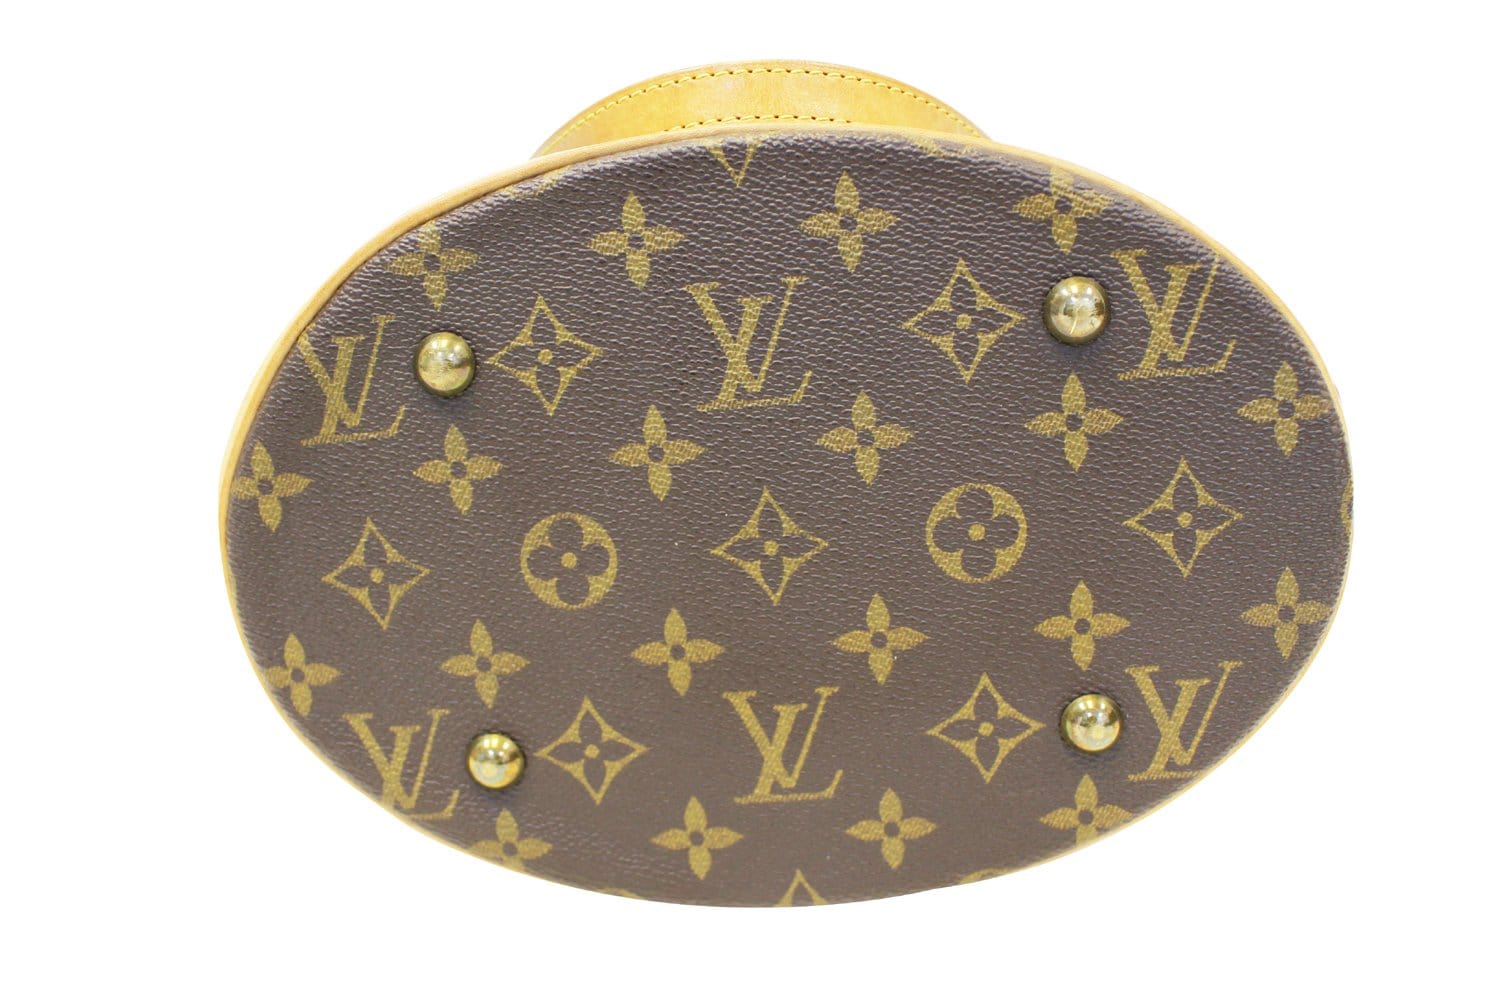 Louis Vuitton Blue Jacquard Monogram Fabric and Leather Limited Edition  Aviator Bag Louis Vuitton